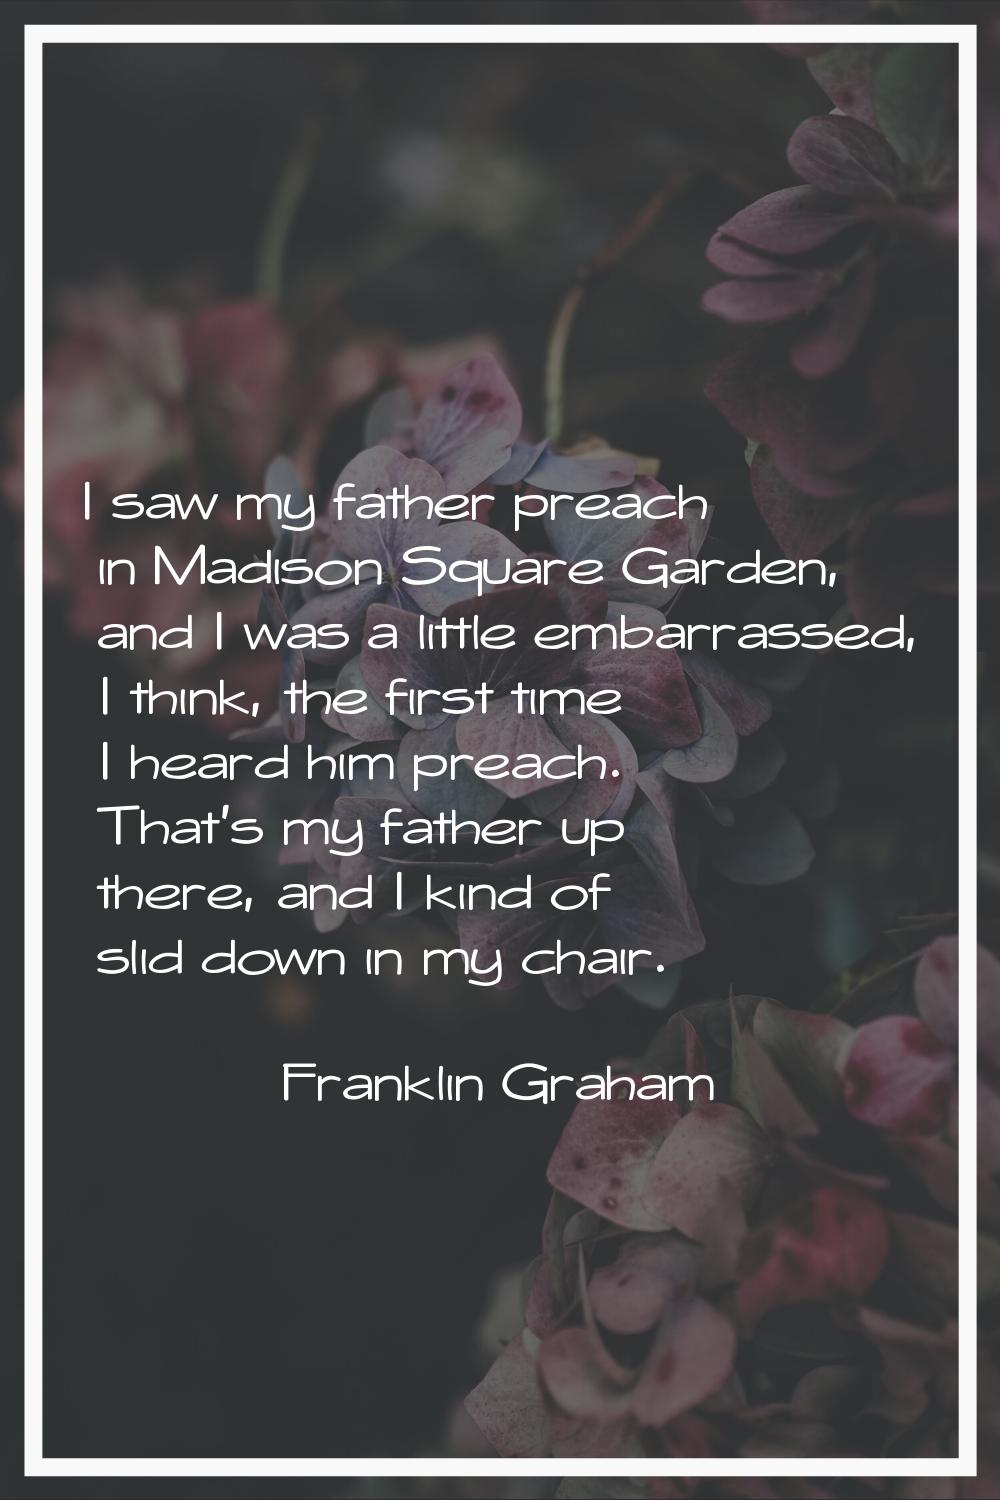 I saw my father preach in Madison Square Garden, and I was a little embarrassed, I think, the first